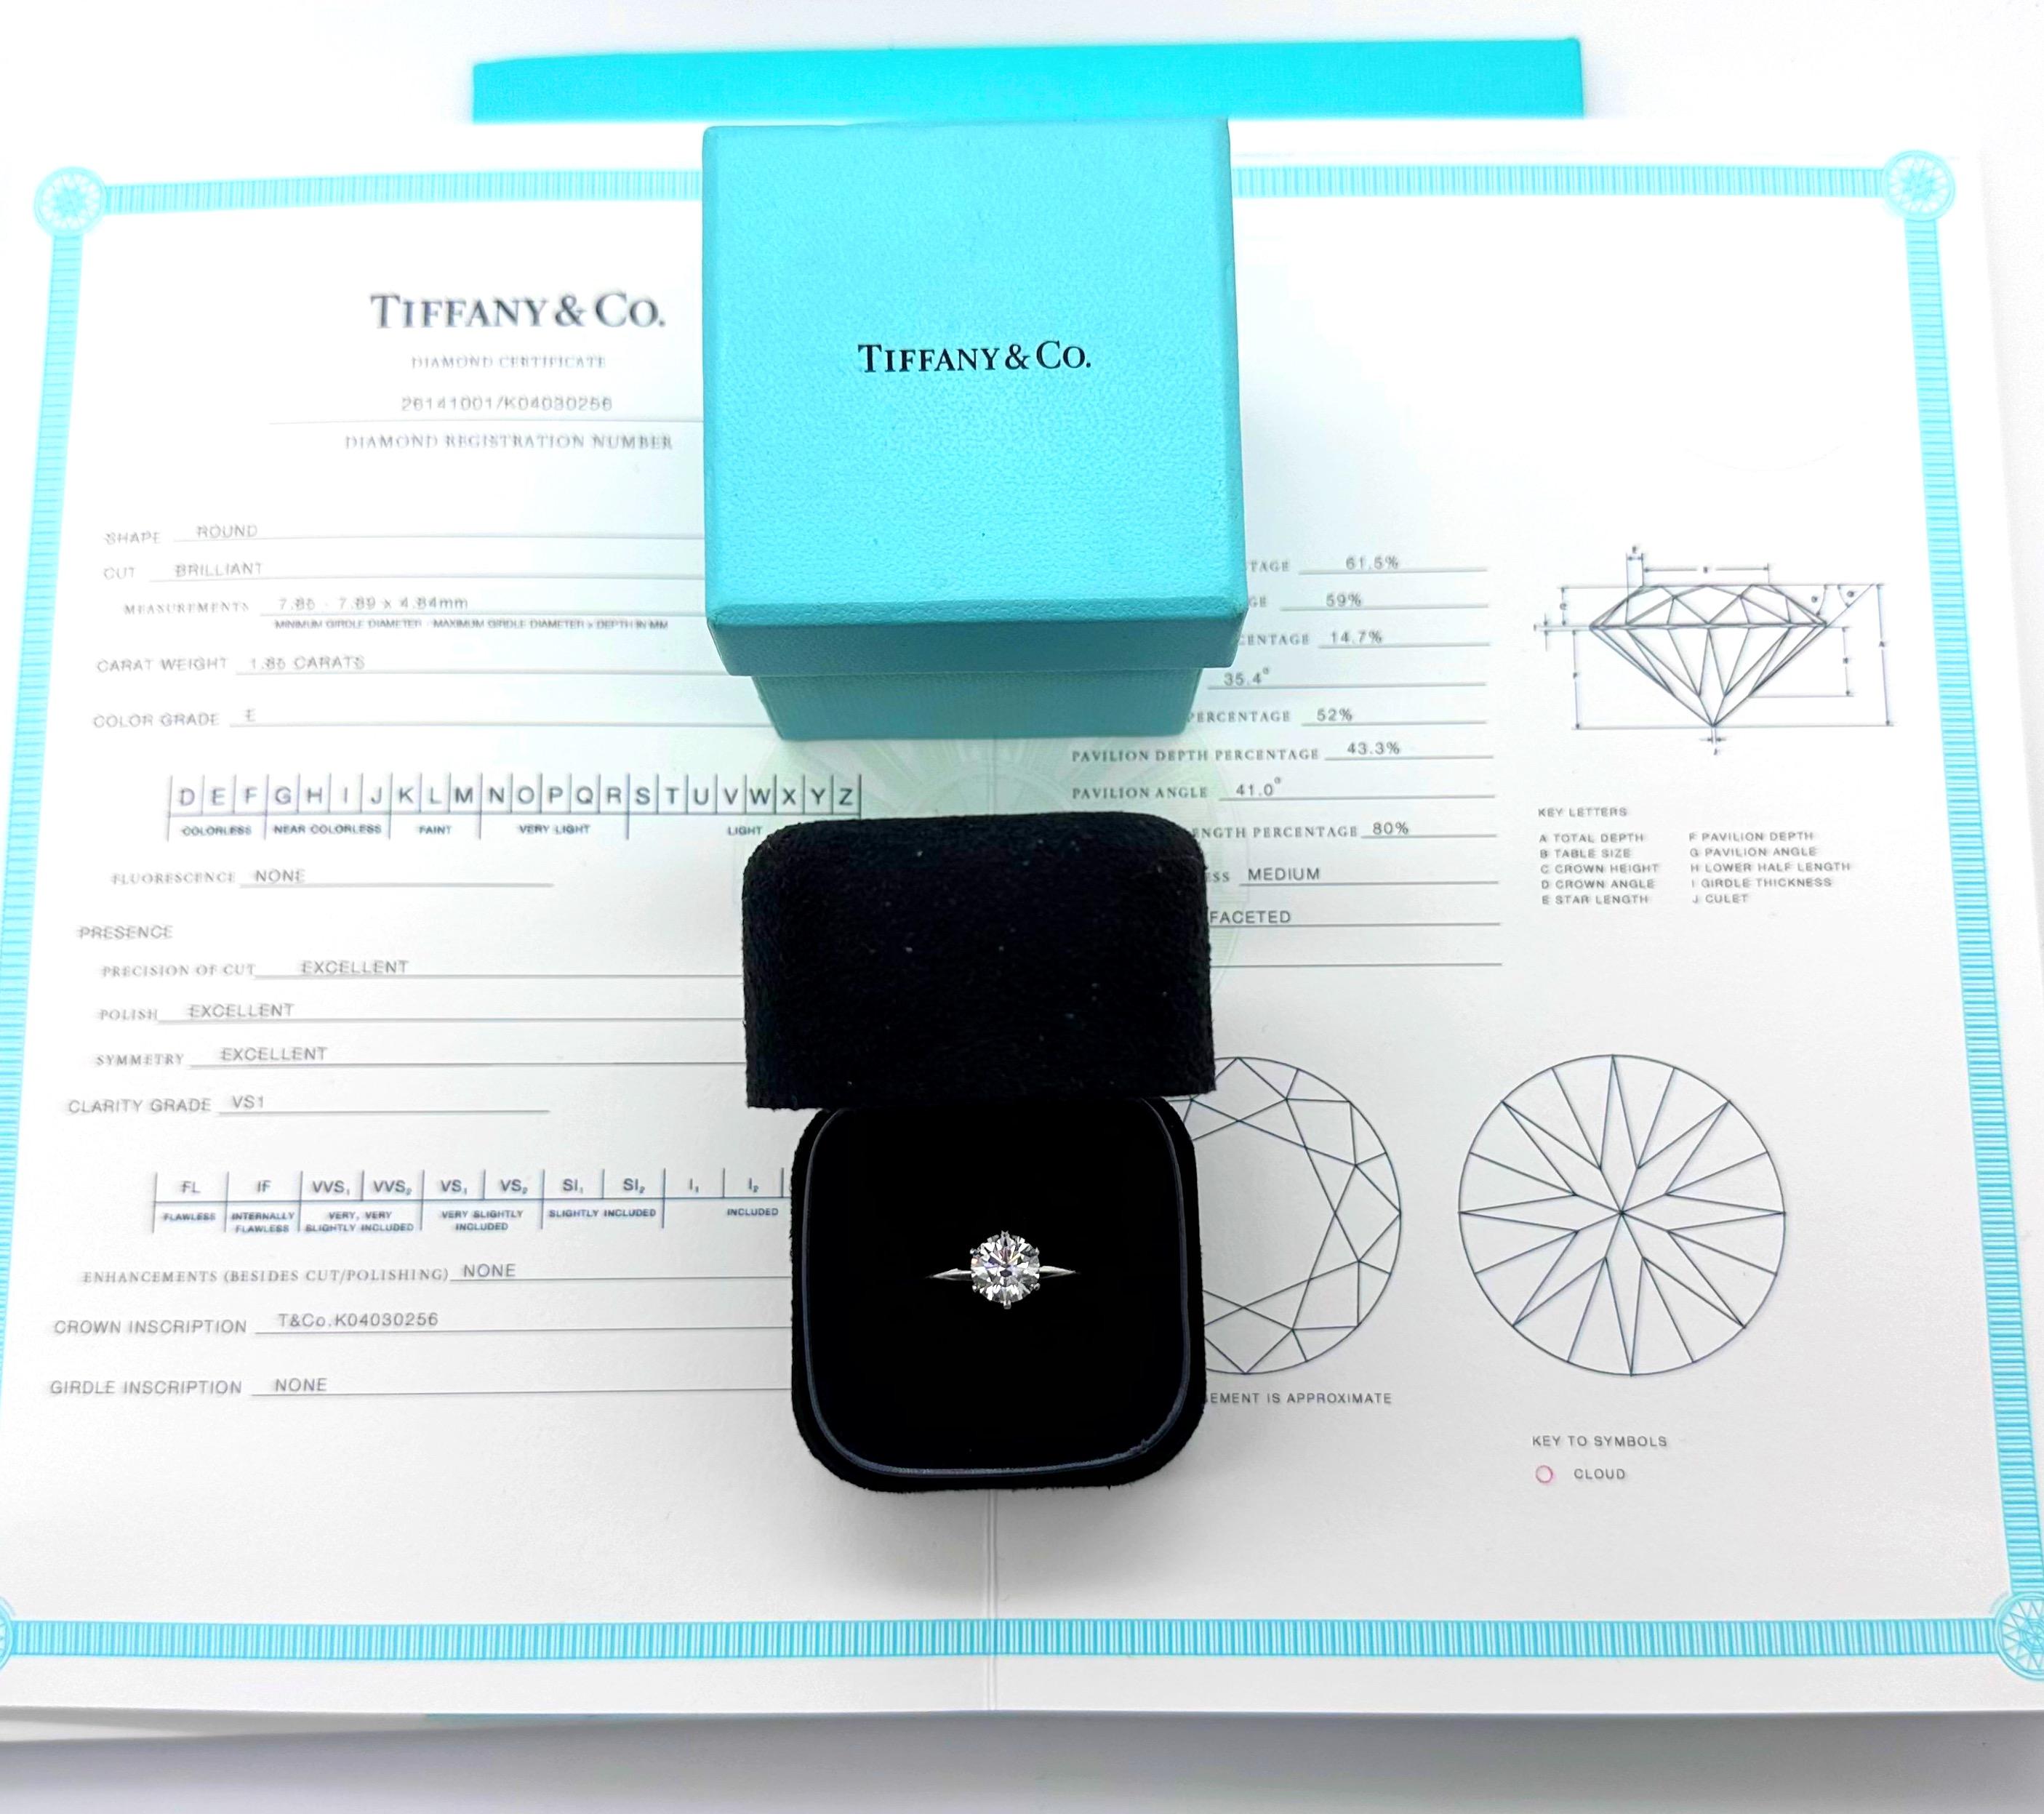 Tiffany & Co Round Diamond Tiffany Setting Engagement Ring
Style:  6 Prong Solitaire
Ref. number:  26141001 / K04030256
Metal:  Platinum PT950
Size:  6.25 
Measurements:  2 mm
TCW:  1.85 tcw
Main Diamond:  Round Brilliant Diamond 
Color & Clarity: 